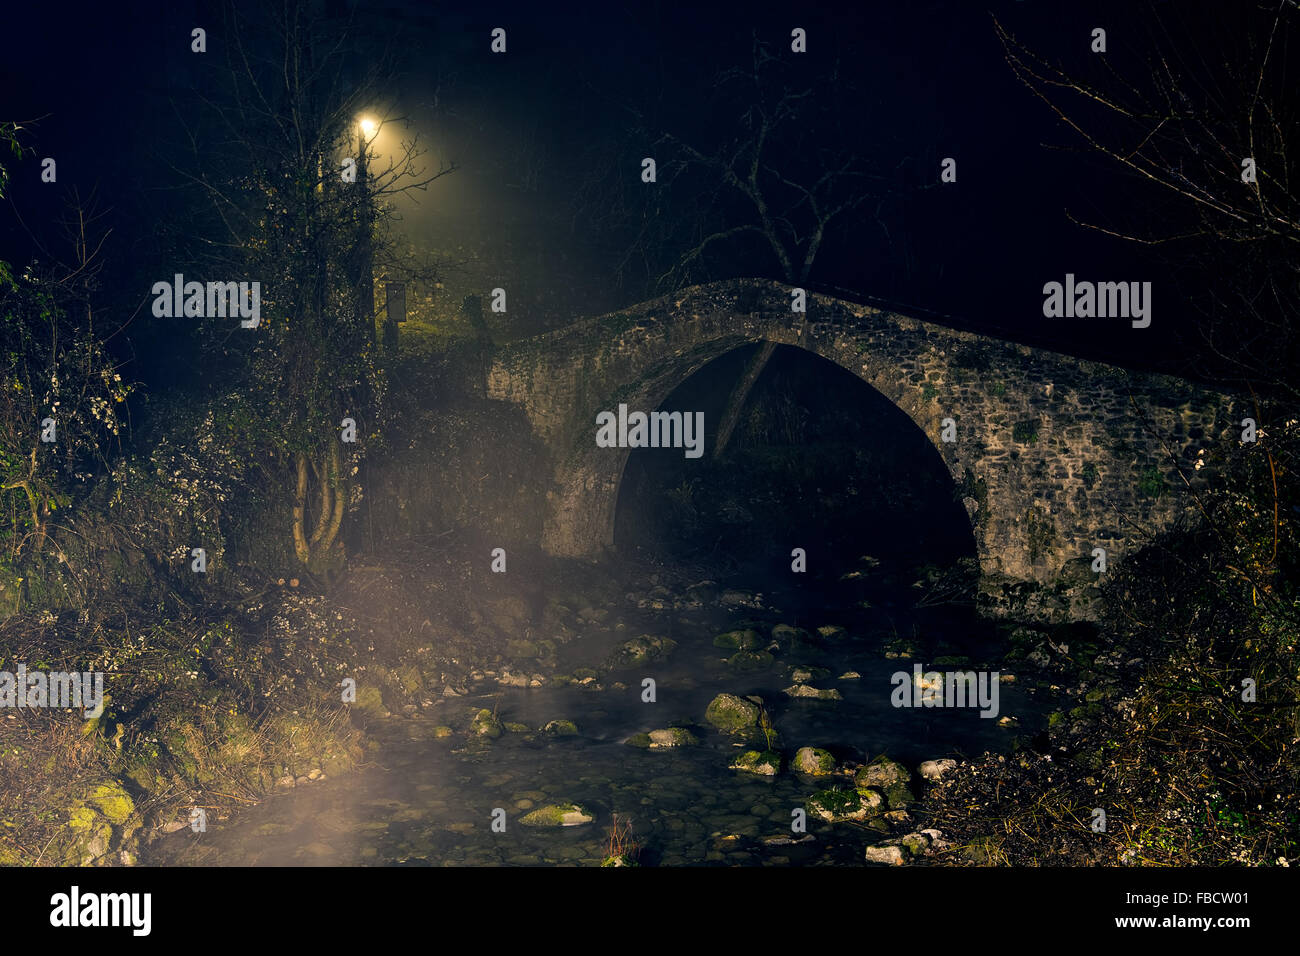 Old stone bridge and light, by night with mist. Stock Photo